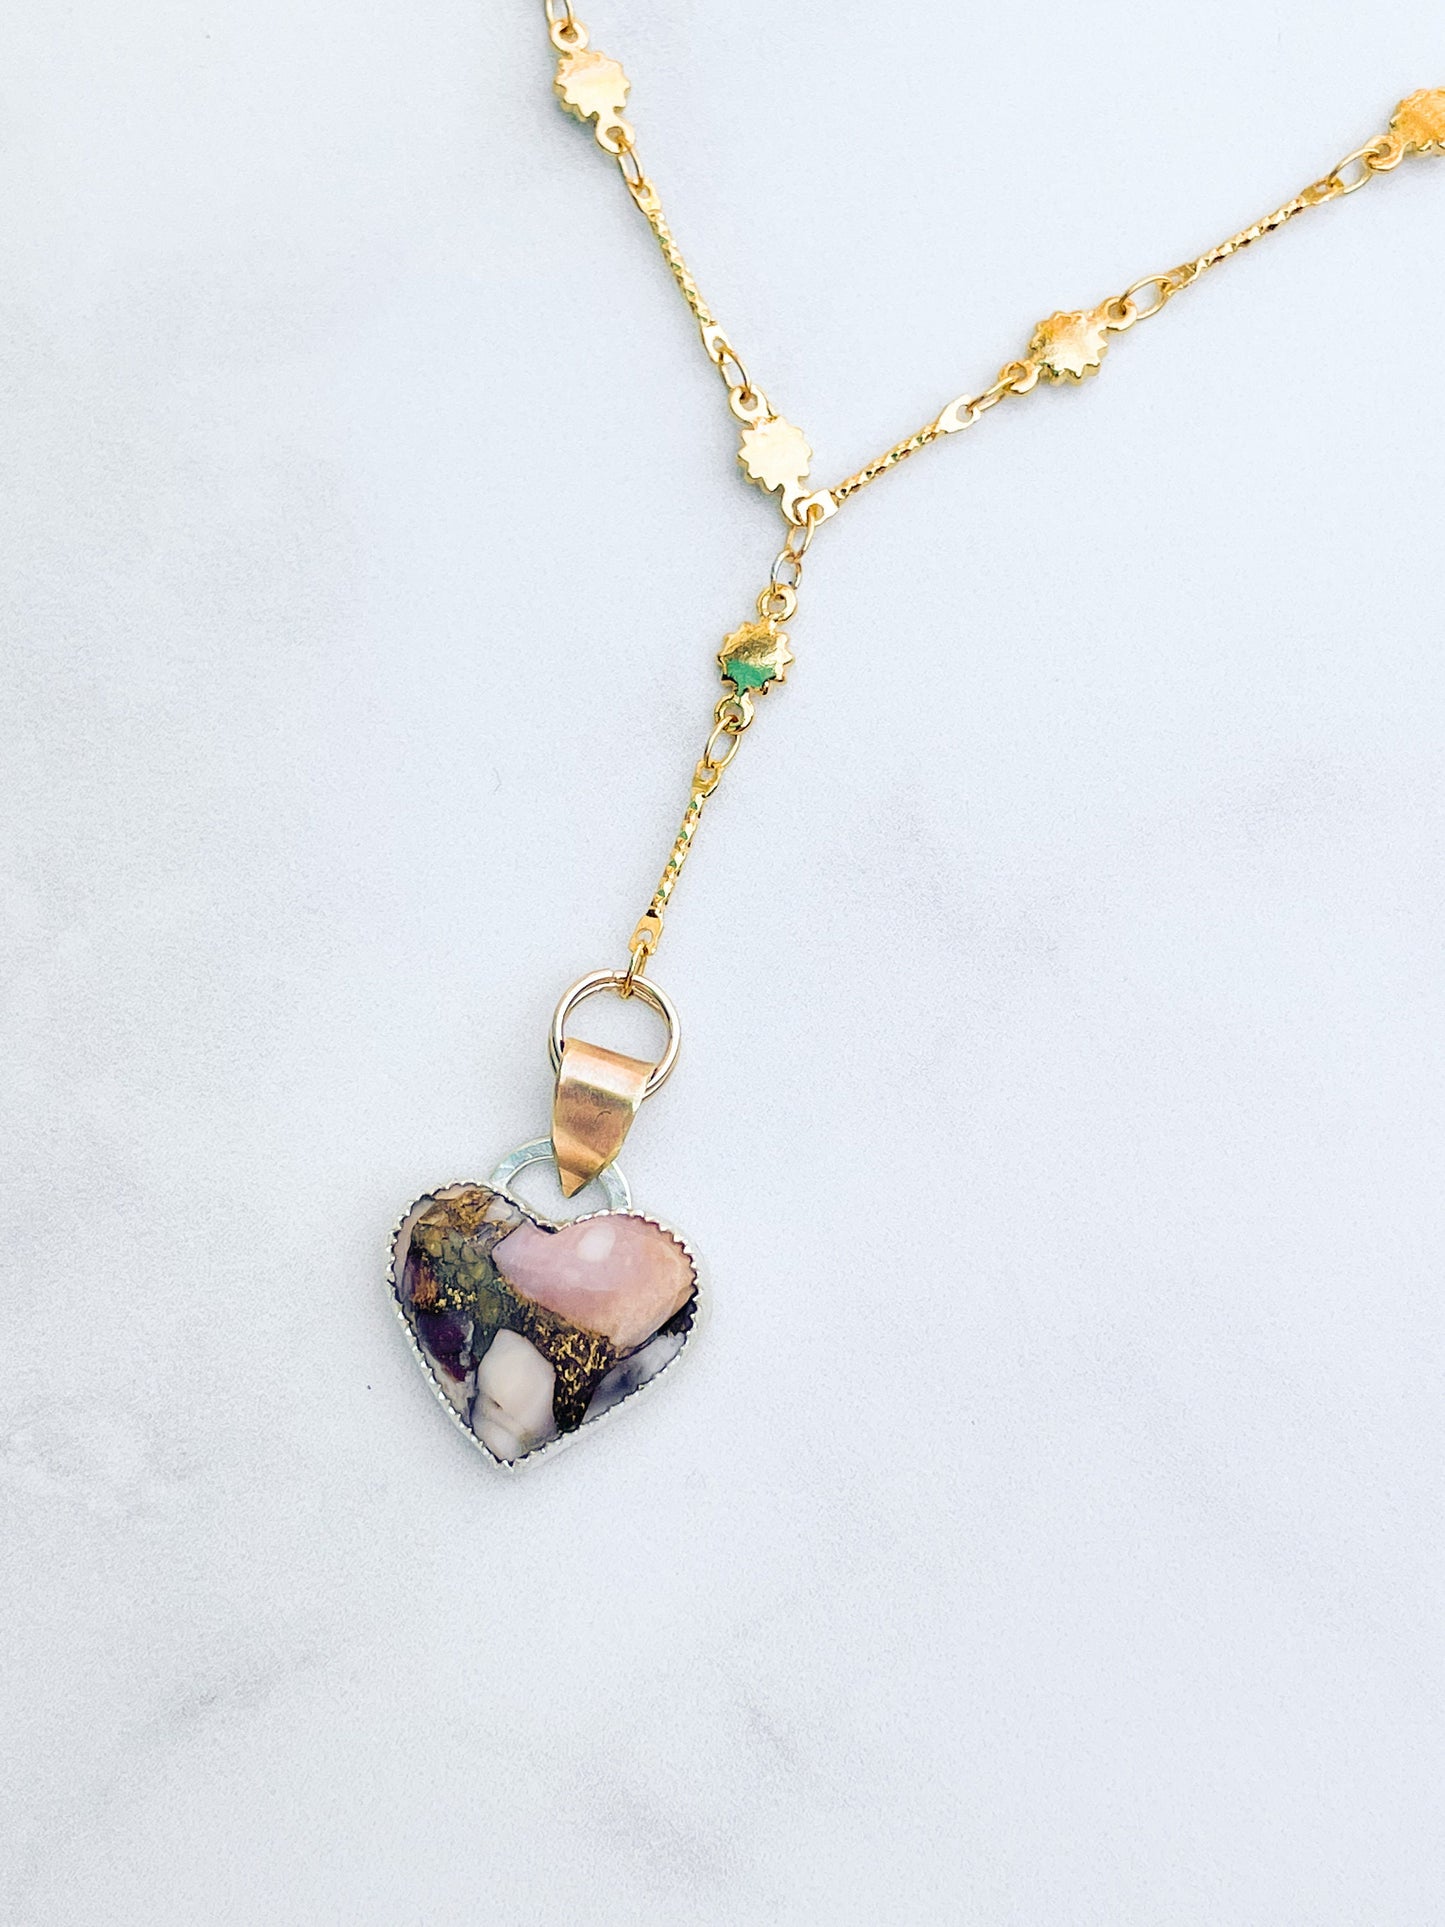 Pink Opal Drop Heart Necklace Sterling Silver and 14k Gold Fill